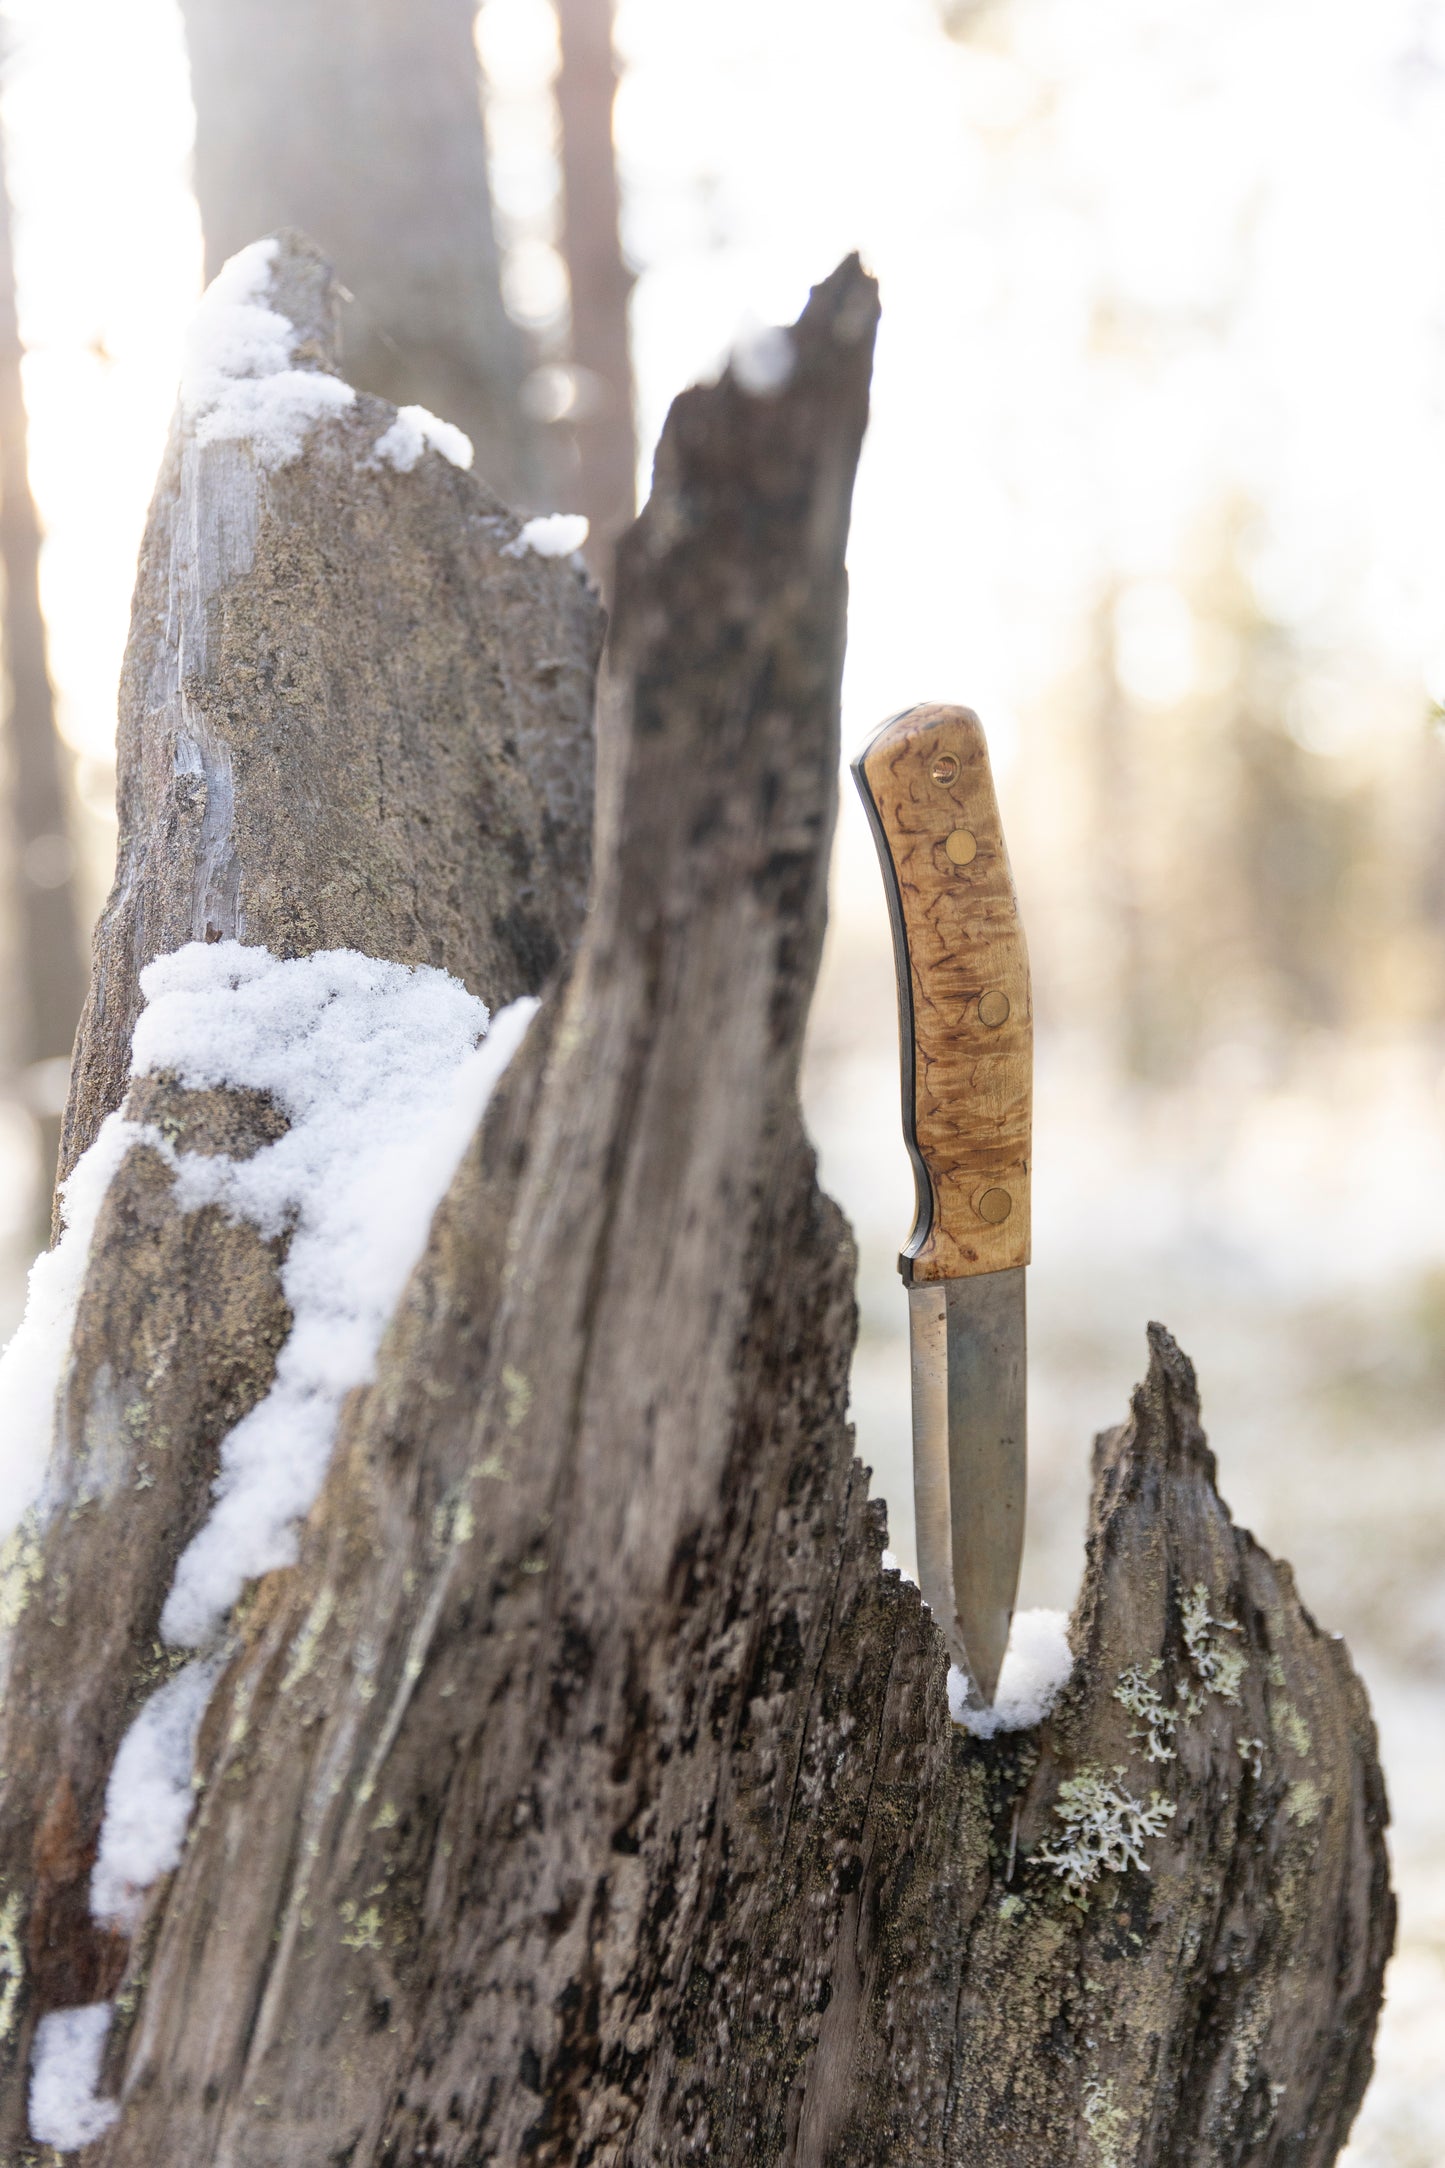 Casström No.10 survival knife with curly birch handle, in a wilderness setting